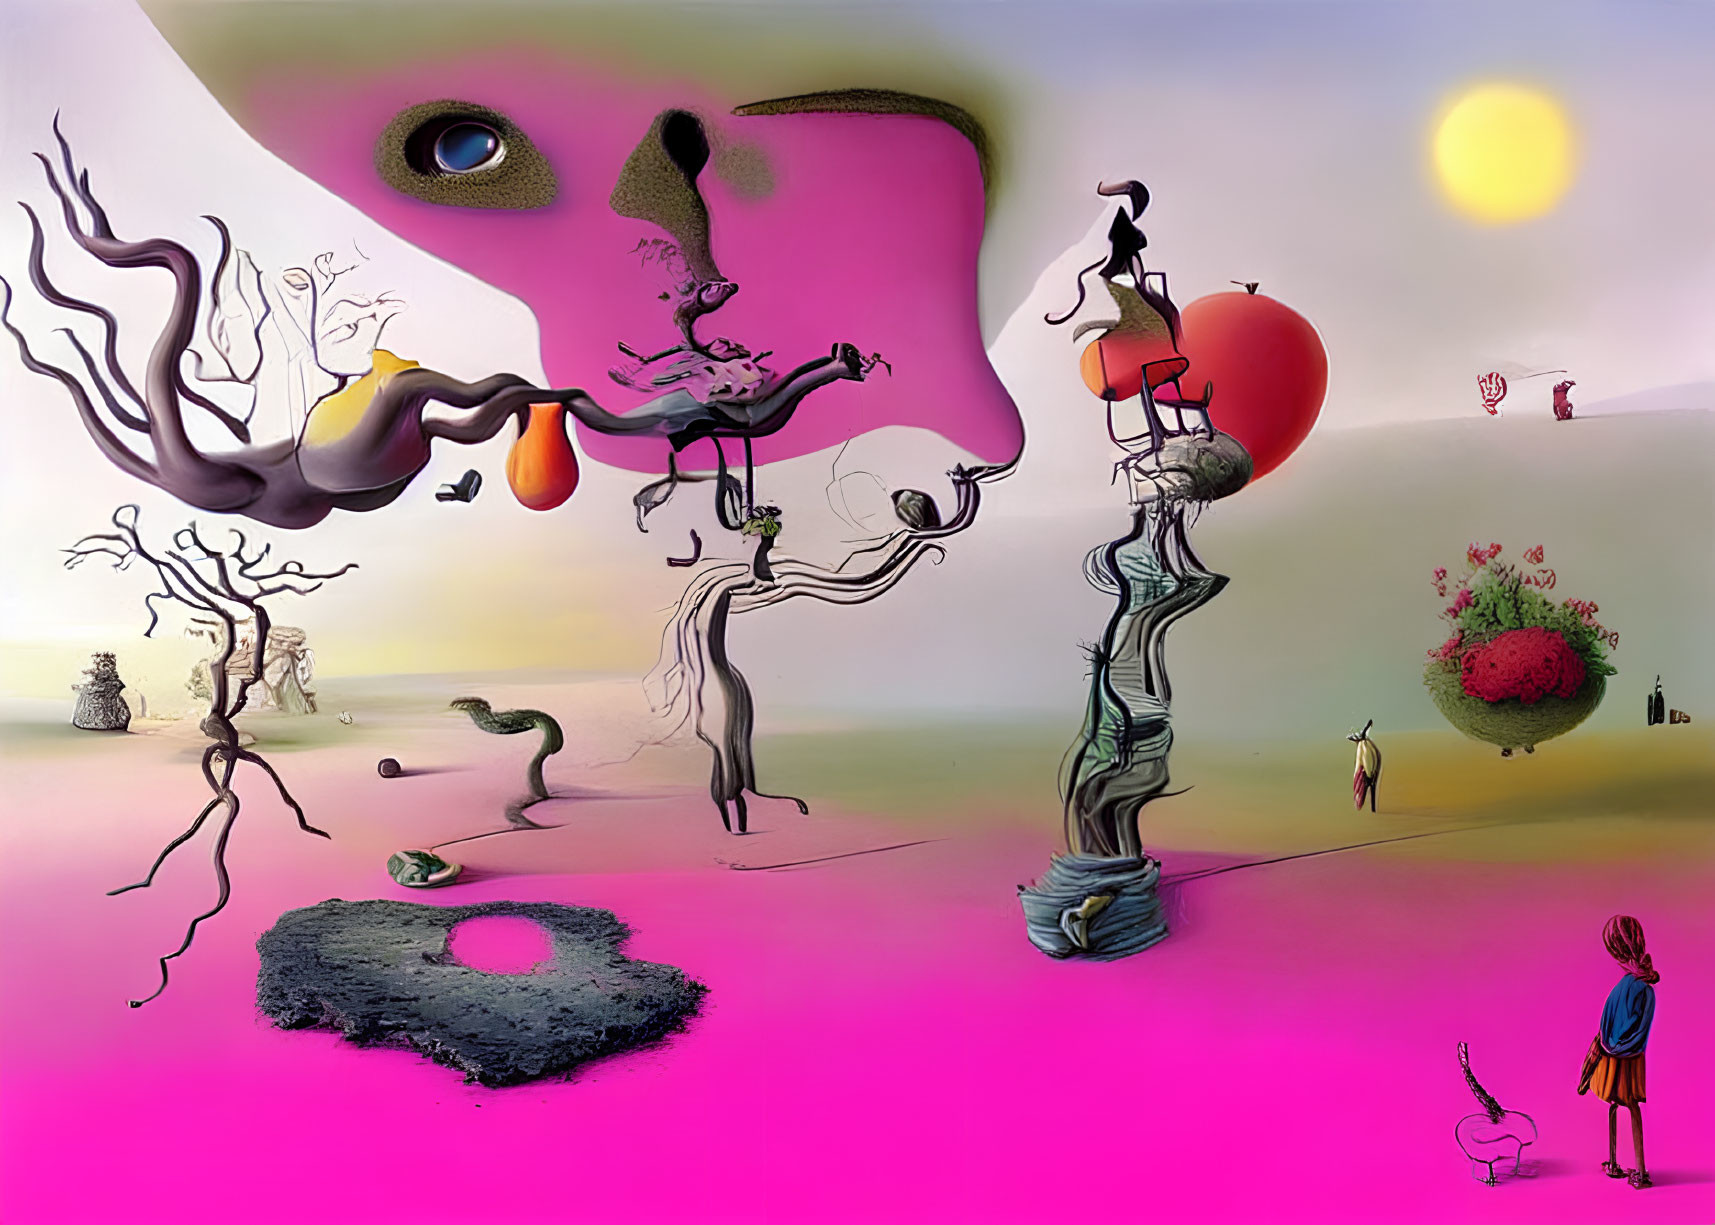 Abstract surreal landscape with distorted figures and large face in pink sky